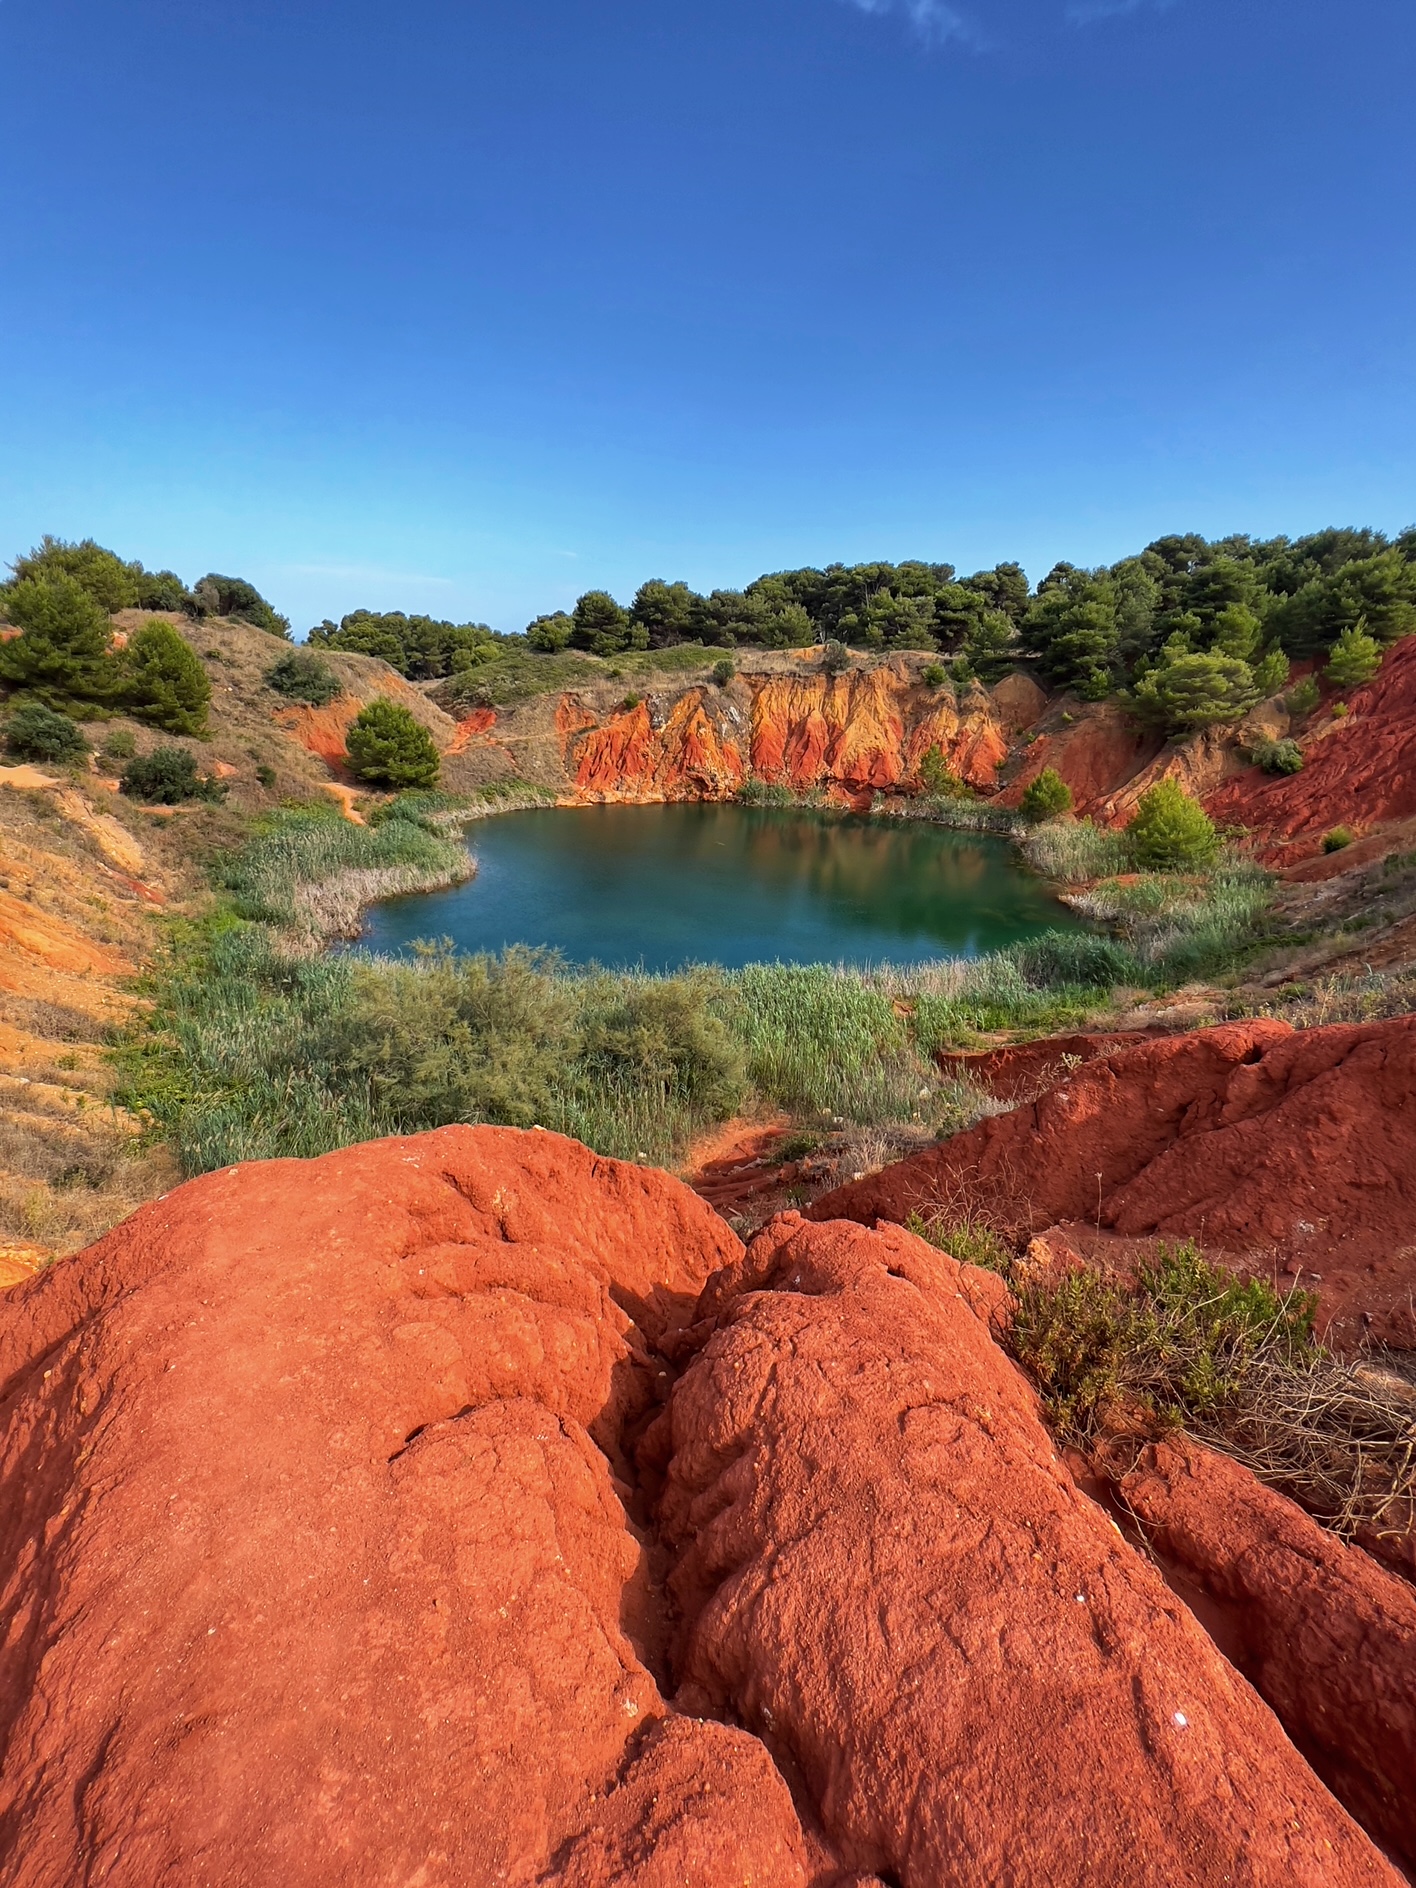 La cava di bauxite, Otranto’s bauxite quarry by the Big Gay Podcast from Puglia and the Puglia Guys | gay Puglia and gay Ostuni guide for Italy’s best gay beach and gay travel | Puglia, Italy, gay travel, gaycation